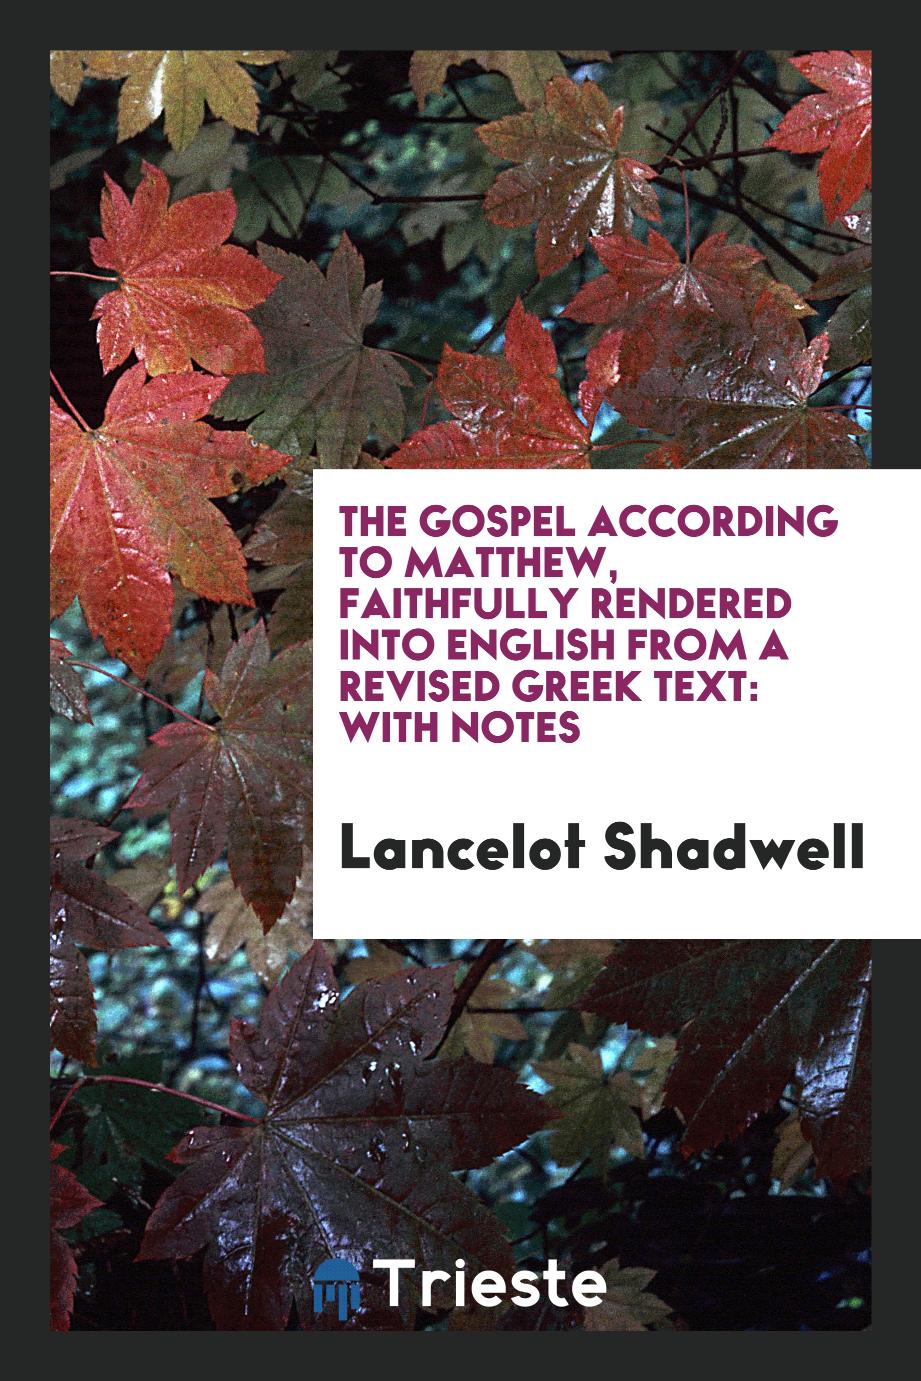 The Gospel According to Matthew, Faithfully Rendered into English from a Revised Greek Text: With Notes